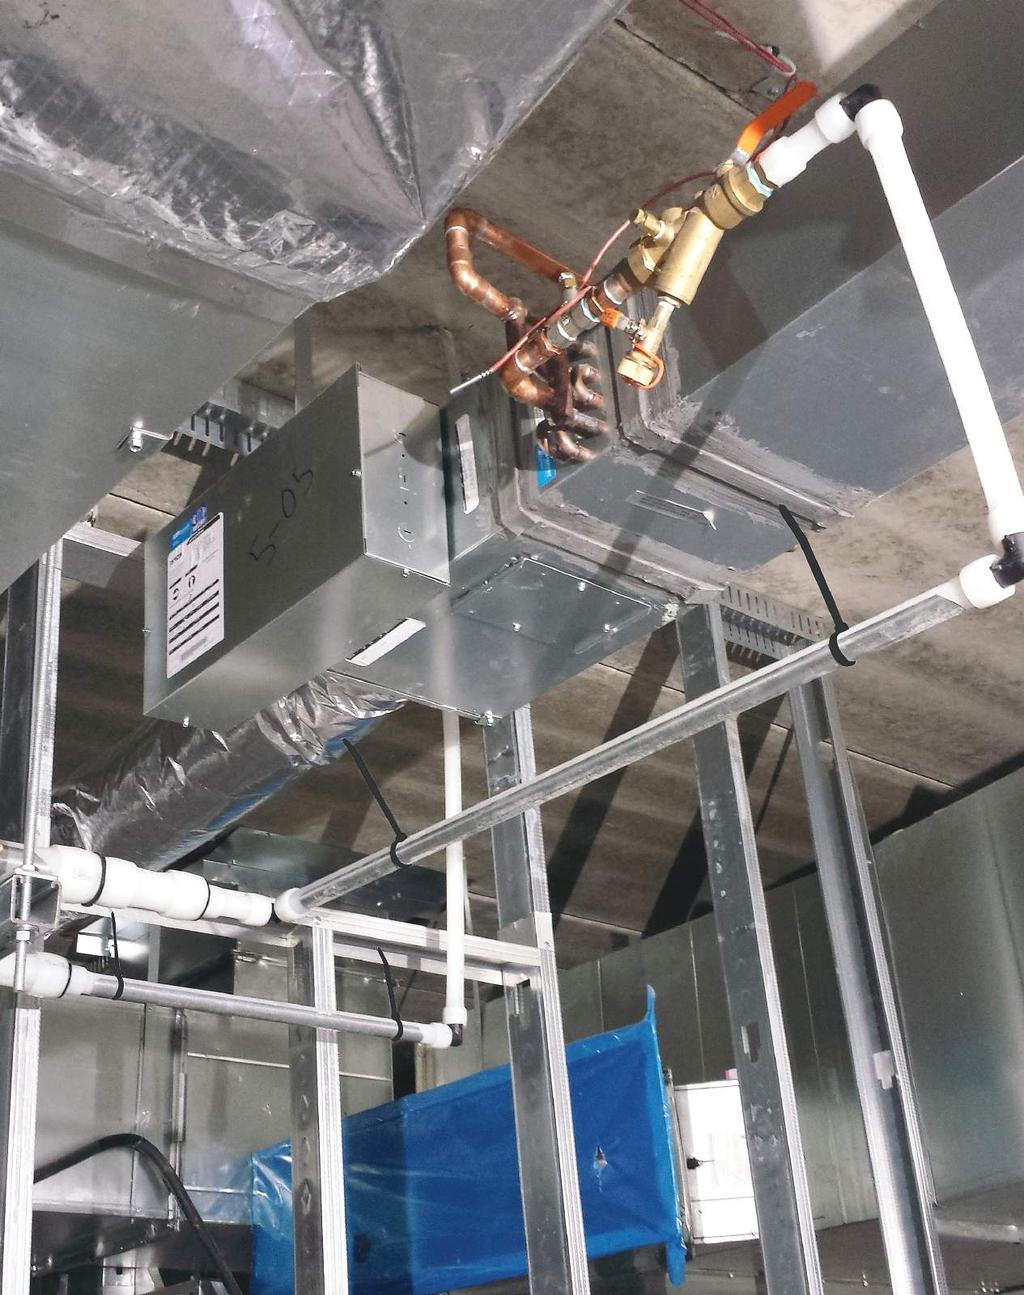 Aloft Tulsa Downtown Hotel Tulsa, OK Project highlights: 1960s historical building renovation Uponor PEX plumbing system Wirsbo hepex hydronic distribution Installing contractor: Palmer Mechanical,